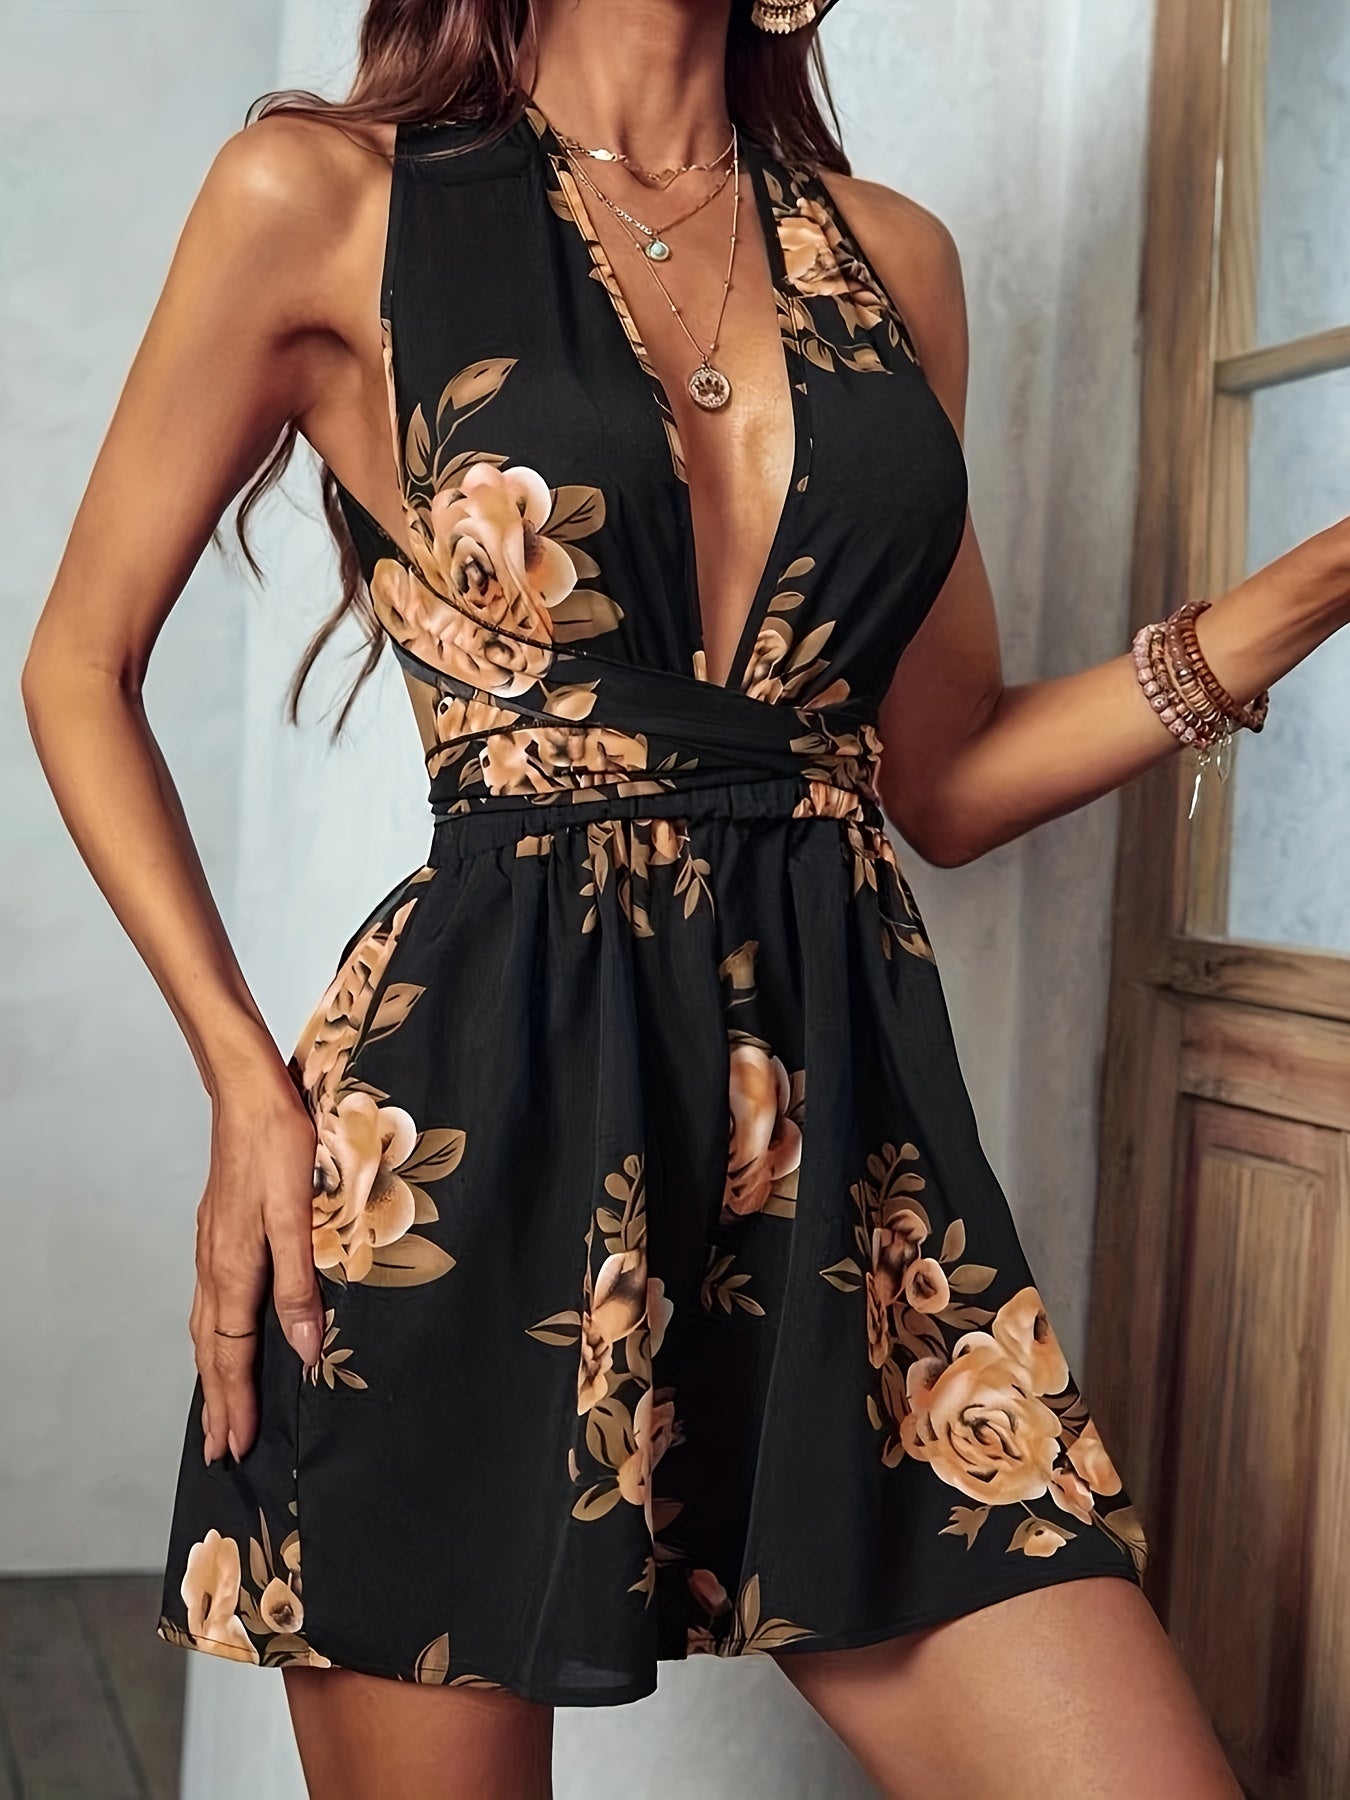 Floral Print Lace Up Romper Jumpsuit, Holiday Sleeveless Romper Jumpsuit, Women's Clothing